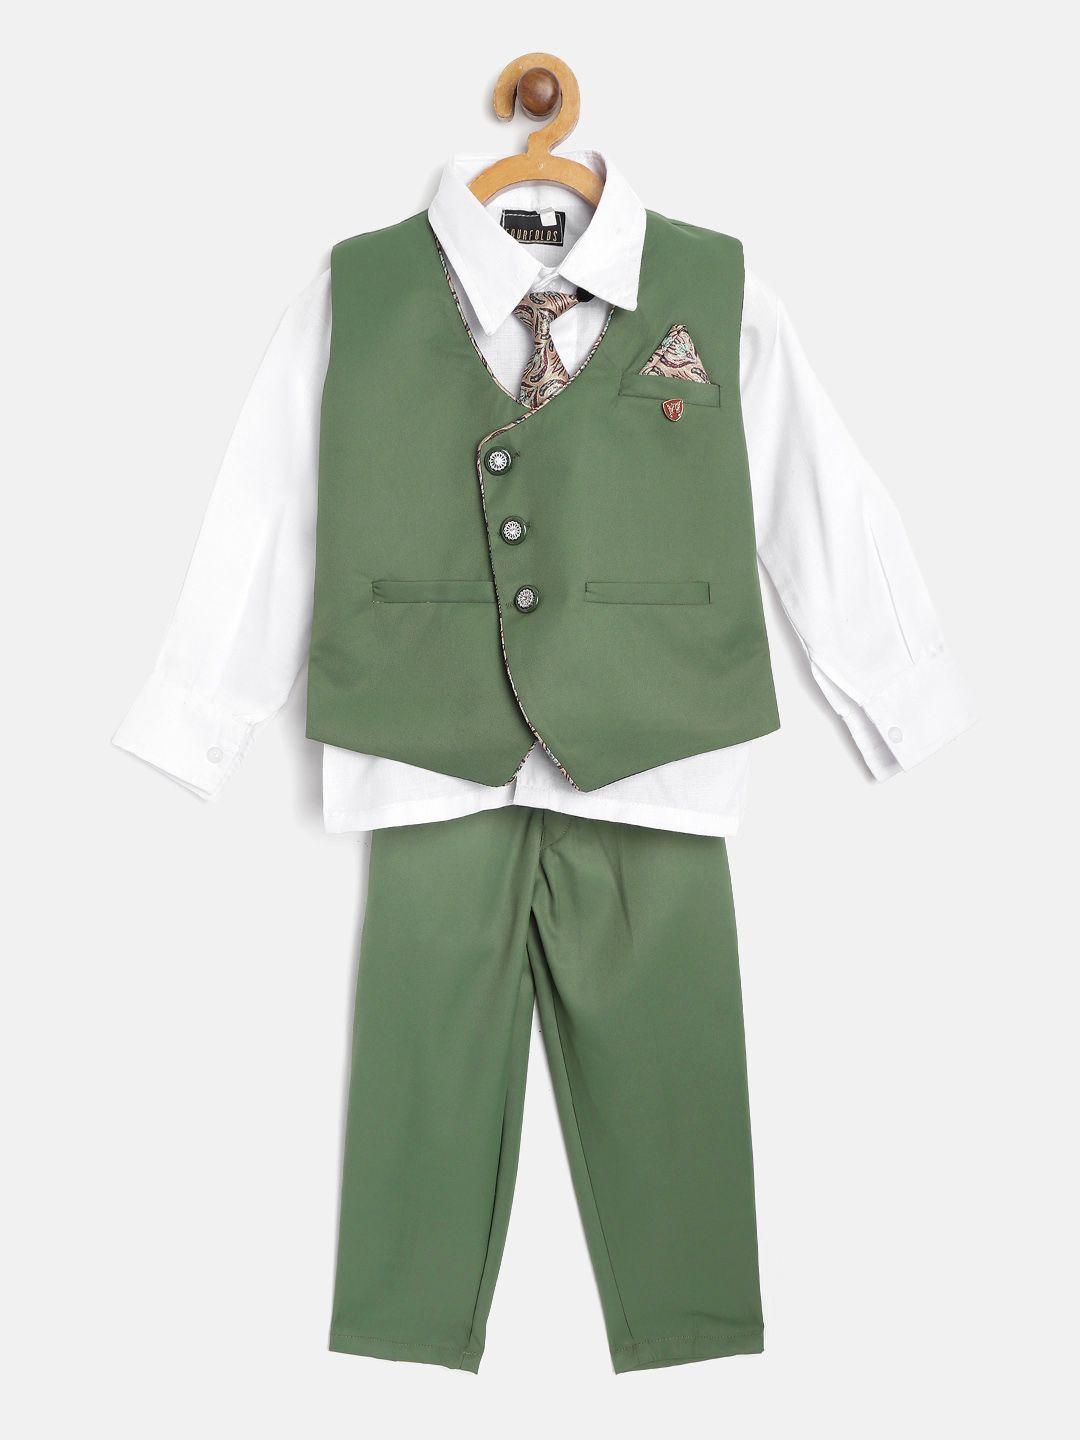 fourfolds-boys-olive-green-&-white-solid-clothing-set-with-waistcoat,-tie-&-cloth-mask